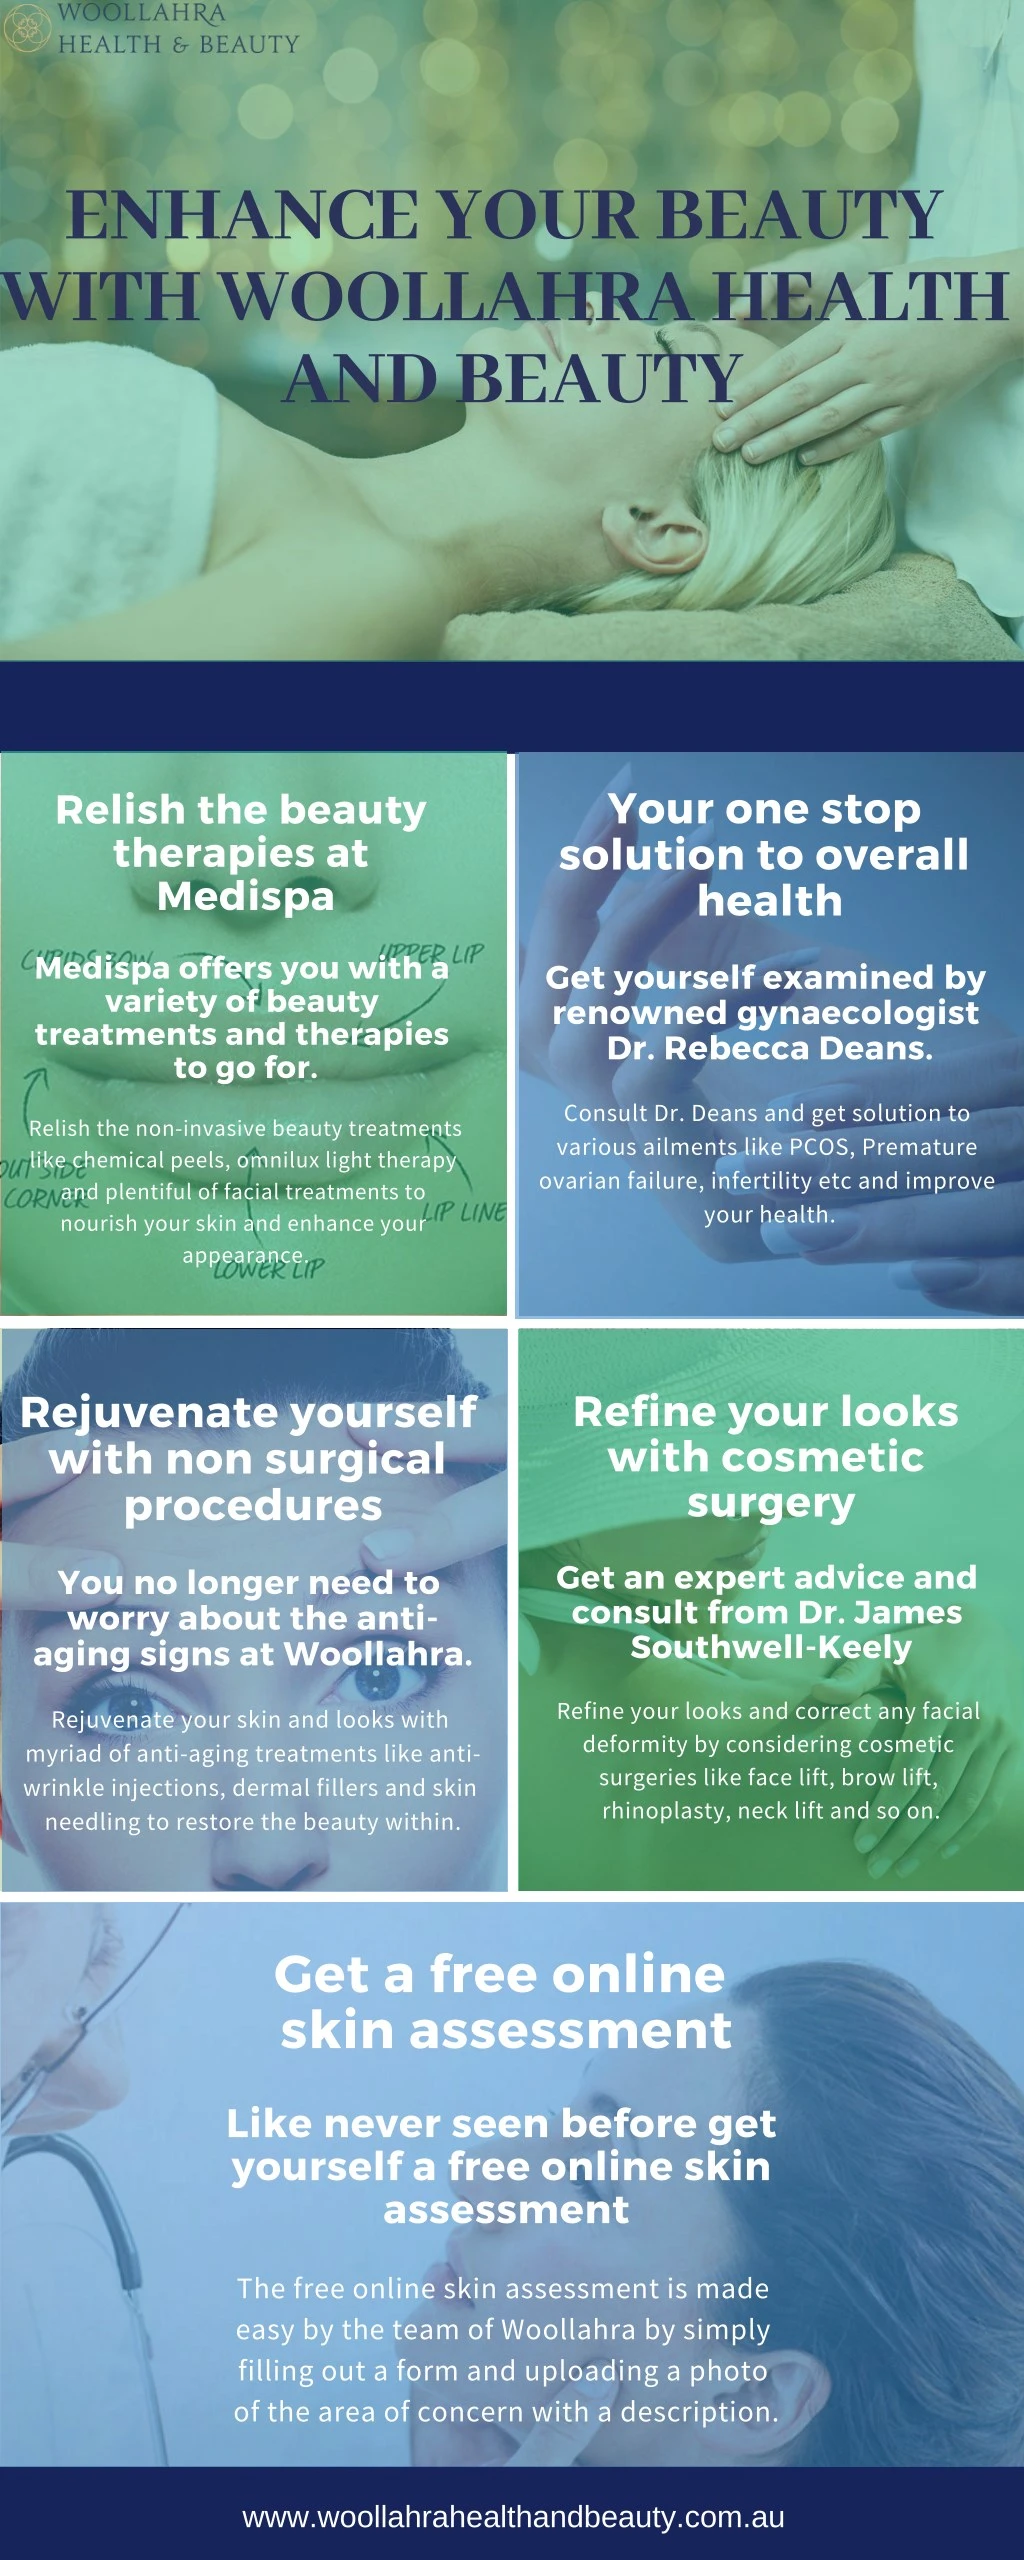 enhance your beauty with woollahra health